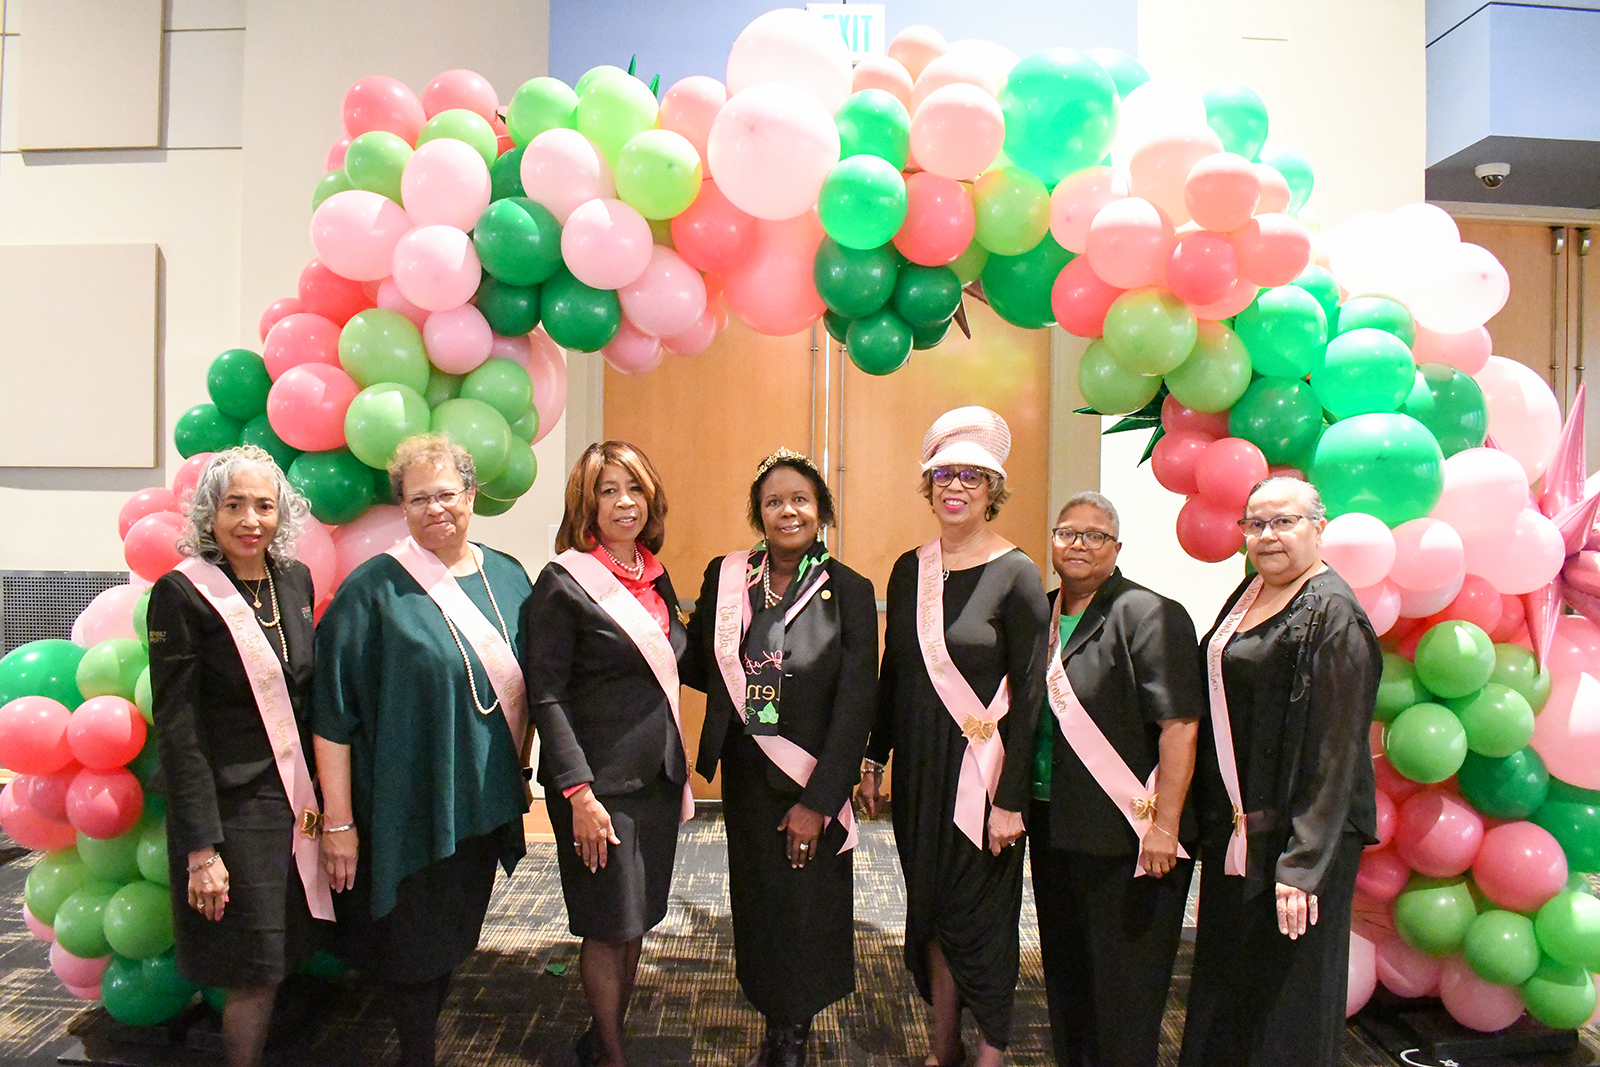 Eight of the original 13 members of Eta Beta chapter of AKA celebrated the 50 anniversary at Vanderbilt Nov. 9, 2022, surrounded by pink and green balloons.